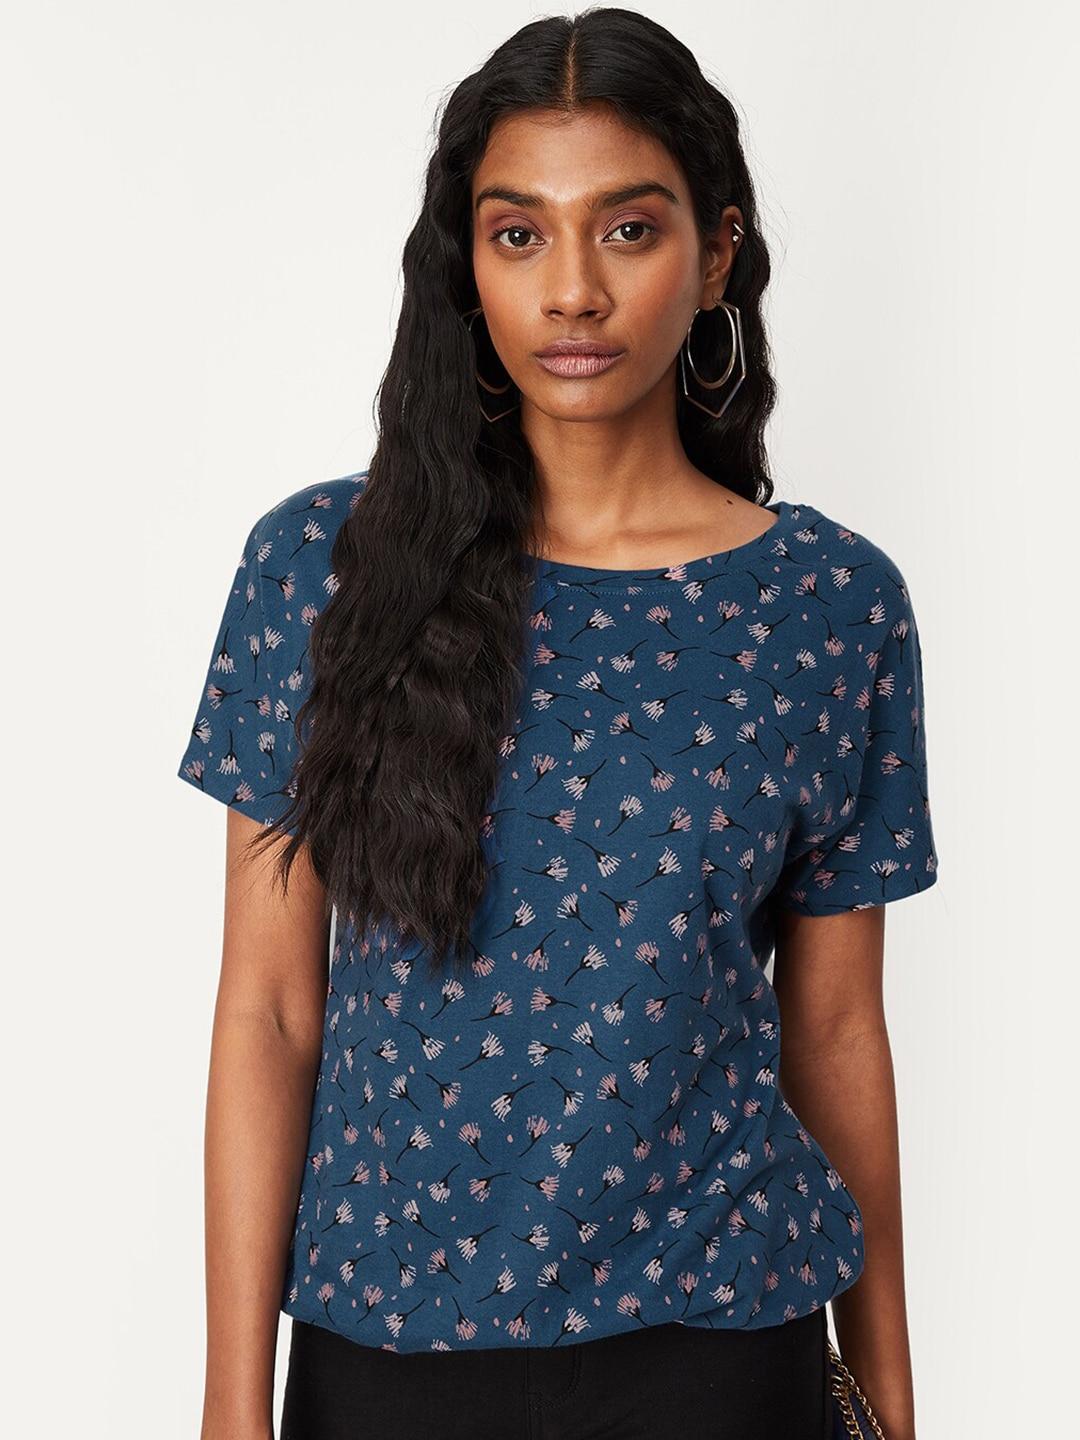 max-ditsy-floral-printed-short-sleeve-round-neck-pure-cotton-t-shirt